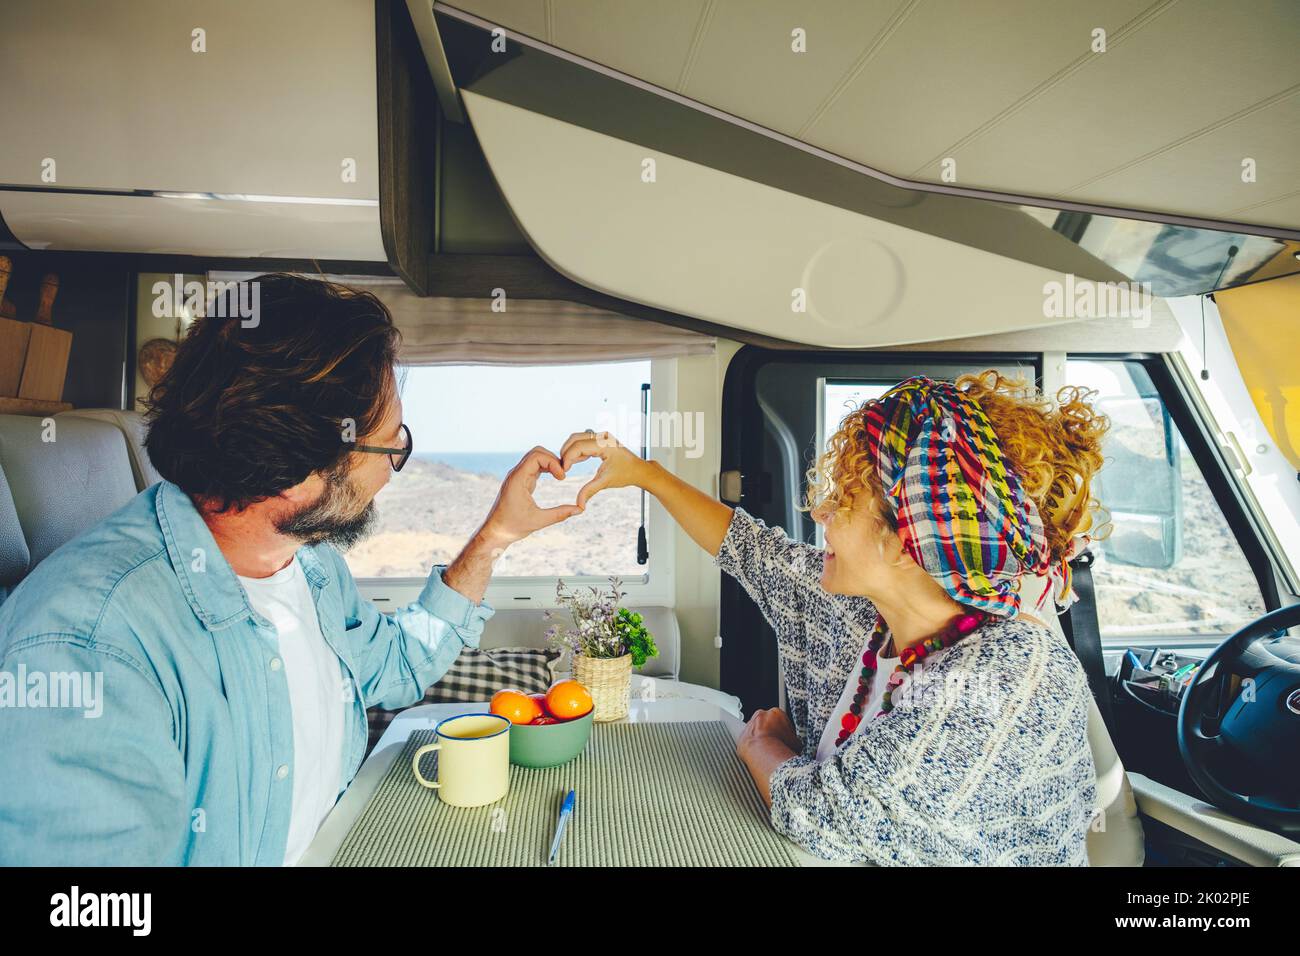 Happy mature couple doing heart gesture sign with hands together inside modern camper van vehicle. Concept of traveler and road trip holiday vacation lifestyle. Man and woman Stock Photo